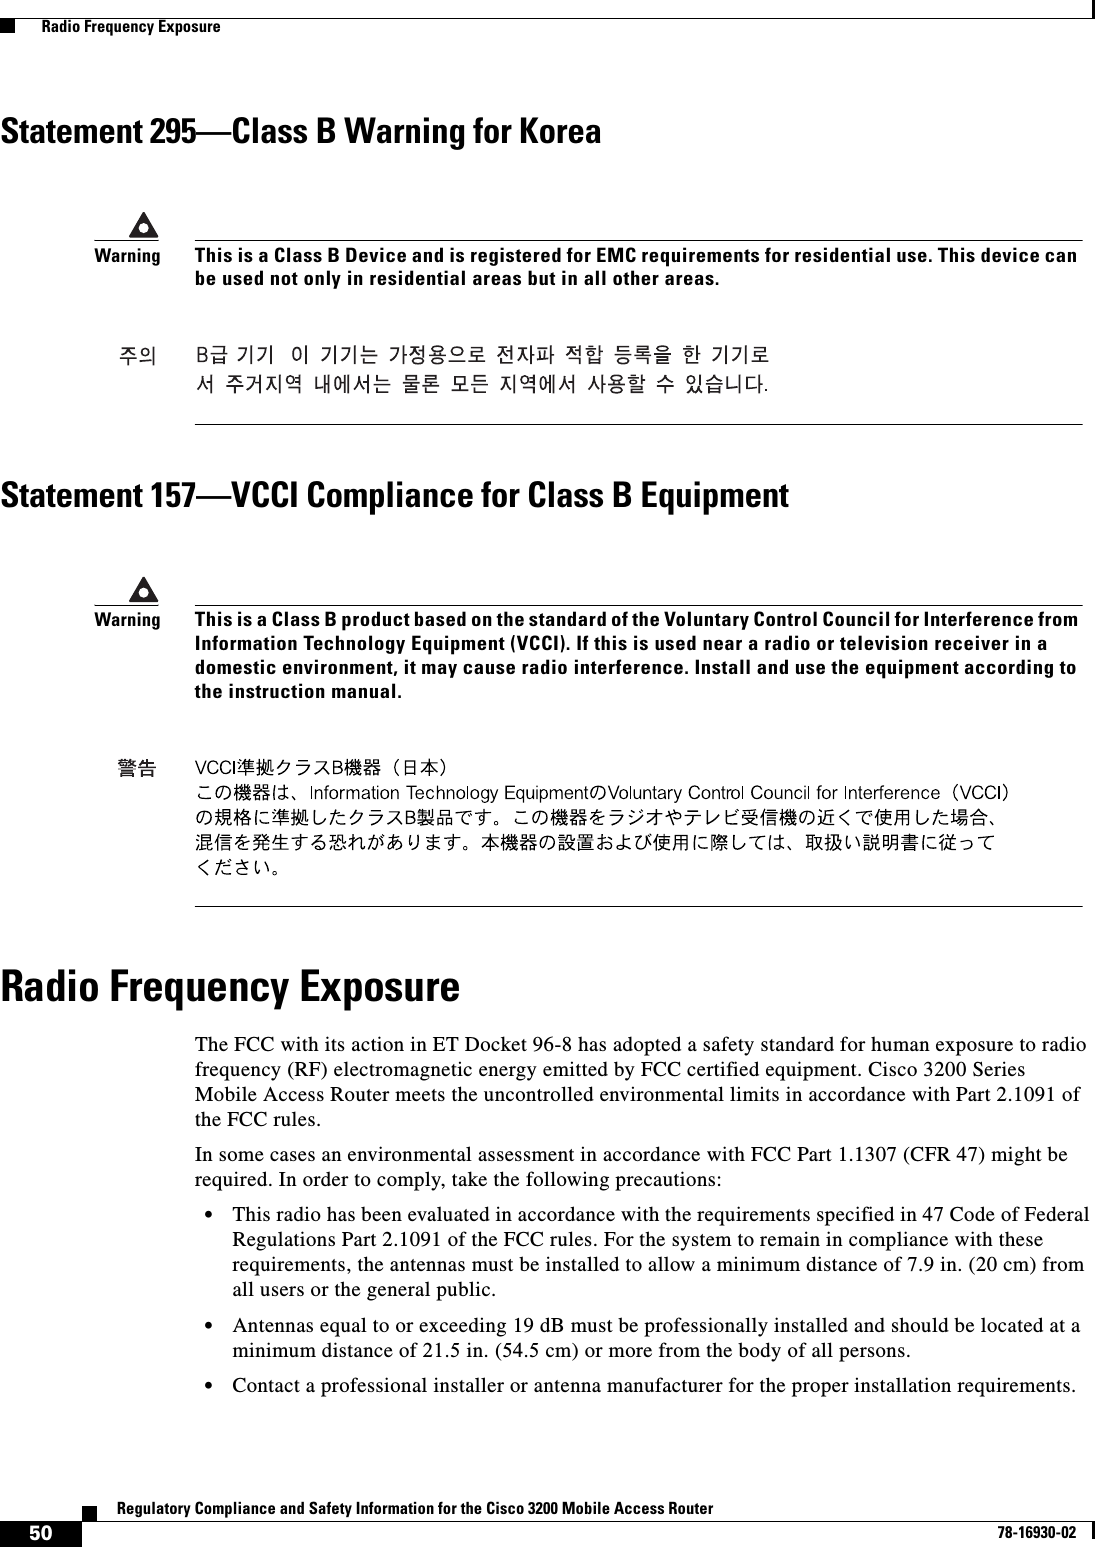 50Regulatory Compliance and Safety Information for the Cisco 3200 Mobile Access Router78-16930-02  Radio Frequency ExposureStatement 295—Class B Warning for KoreaStatement 157—VCCI Compliance for Class B EquipmentRadio Frequency ExposureThe FCC with its action in ET Docket 96-8 has adopted a safety standard for human exposure to radio frequency (RF) electromagnetic energy emitted by FCC certified equipment. Cisco 3200 Series Mobile Access Router meets the uncontrolled environmental limits in accordance with Part 2.1091 of the FCC rules. In some cases an environmental assessment in accordance with FCC Part 1.1307 (CFR 47) might be required. In order to comply, take the following precautions:•This radio has been evaluated in accordance with the requirements specified in 47 Code of Federal Regulations Part 2.1091 of the FCC rules. For the system to remain in compliance with these requirements, the antennas must be installed to allow a minimum distance of 7.9 in. (20 cm) from all users or the general public. •Antennas equal to or exceeding 19 dB must be professionally installed and should be located at a minimum distance of 21.5 in. (54.5 cm) or more from the body of all persons.•Contact a professional installer or antenna manufacturer for the proper installation requirements.WarningThis is a Class B Device and is registered for EMC requirements for residential use. This device can be used not only in residential areas but in all other areas.WarningThis is a Class B product based on the standard of the Voluntary Control Council for Interference from Information Technology Equipment (VCCI). If this is used near a radio or television receiver in a domestic environment, it may cause radio interference. Install and use the equipment according to the instruction manual.